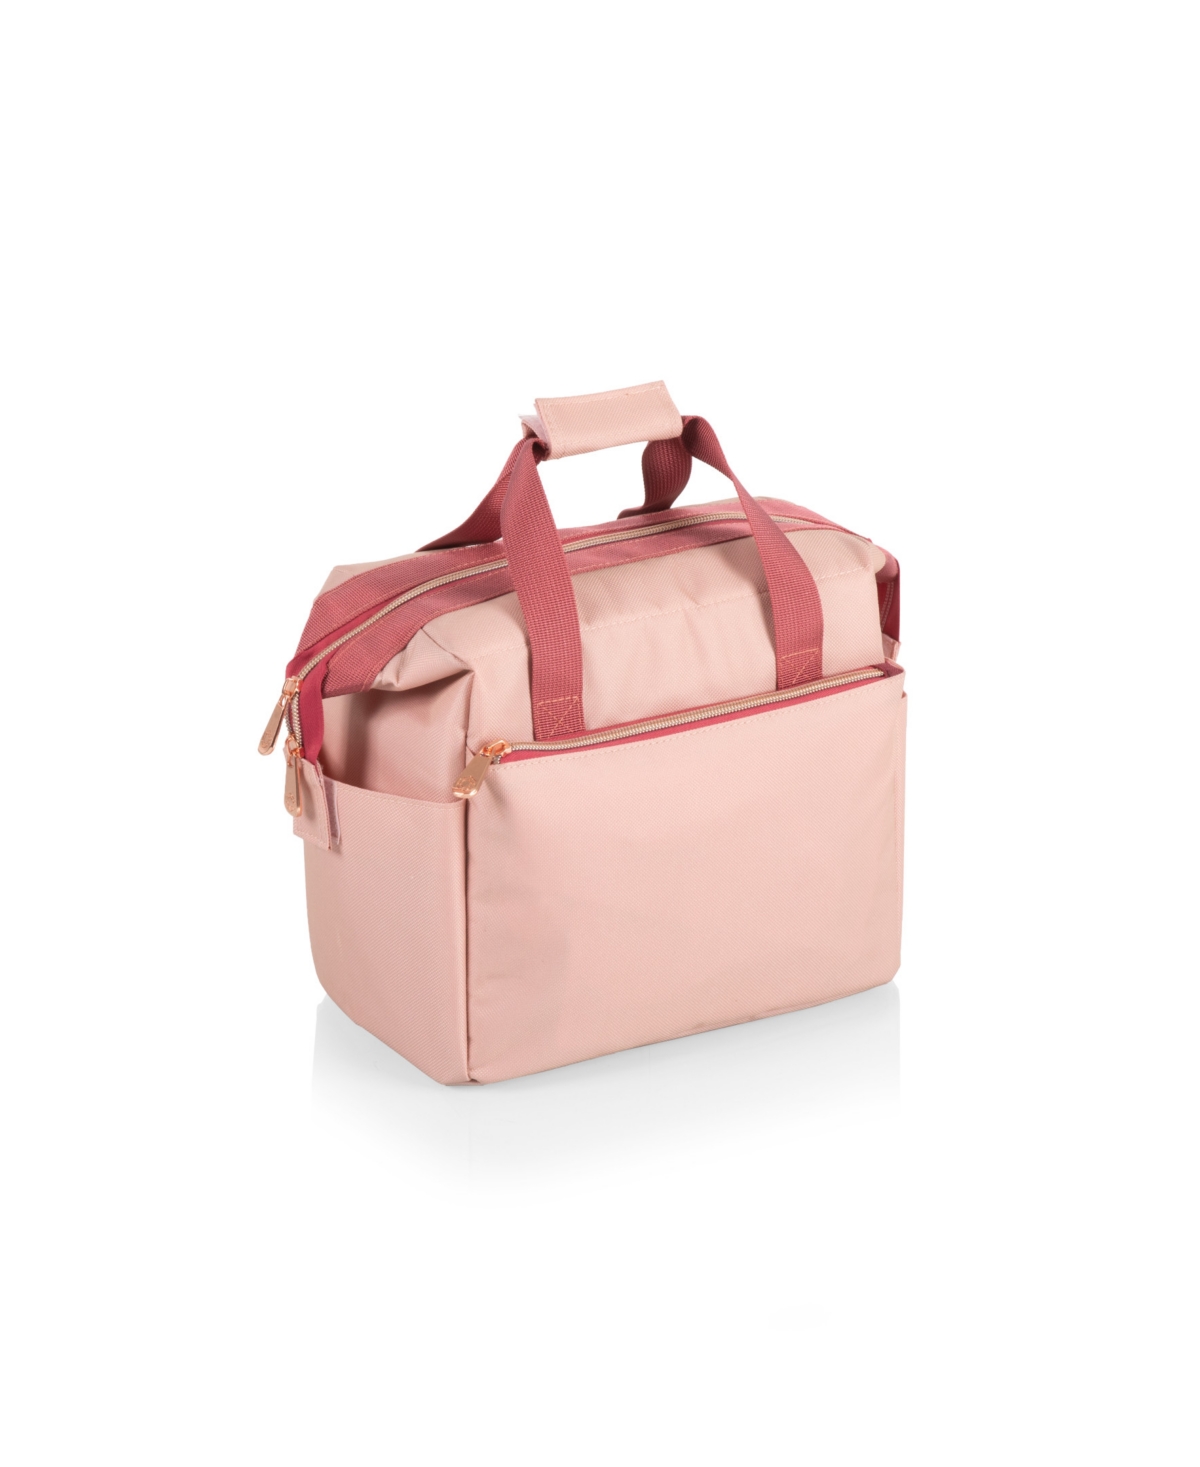 Oniva On The Go Lunch Cooler Bag In Pink